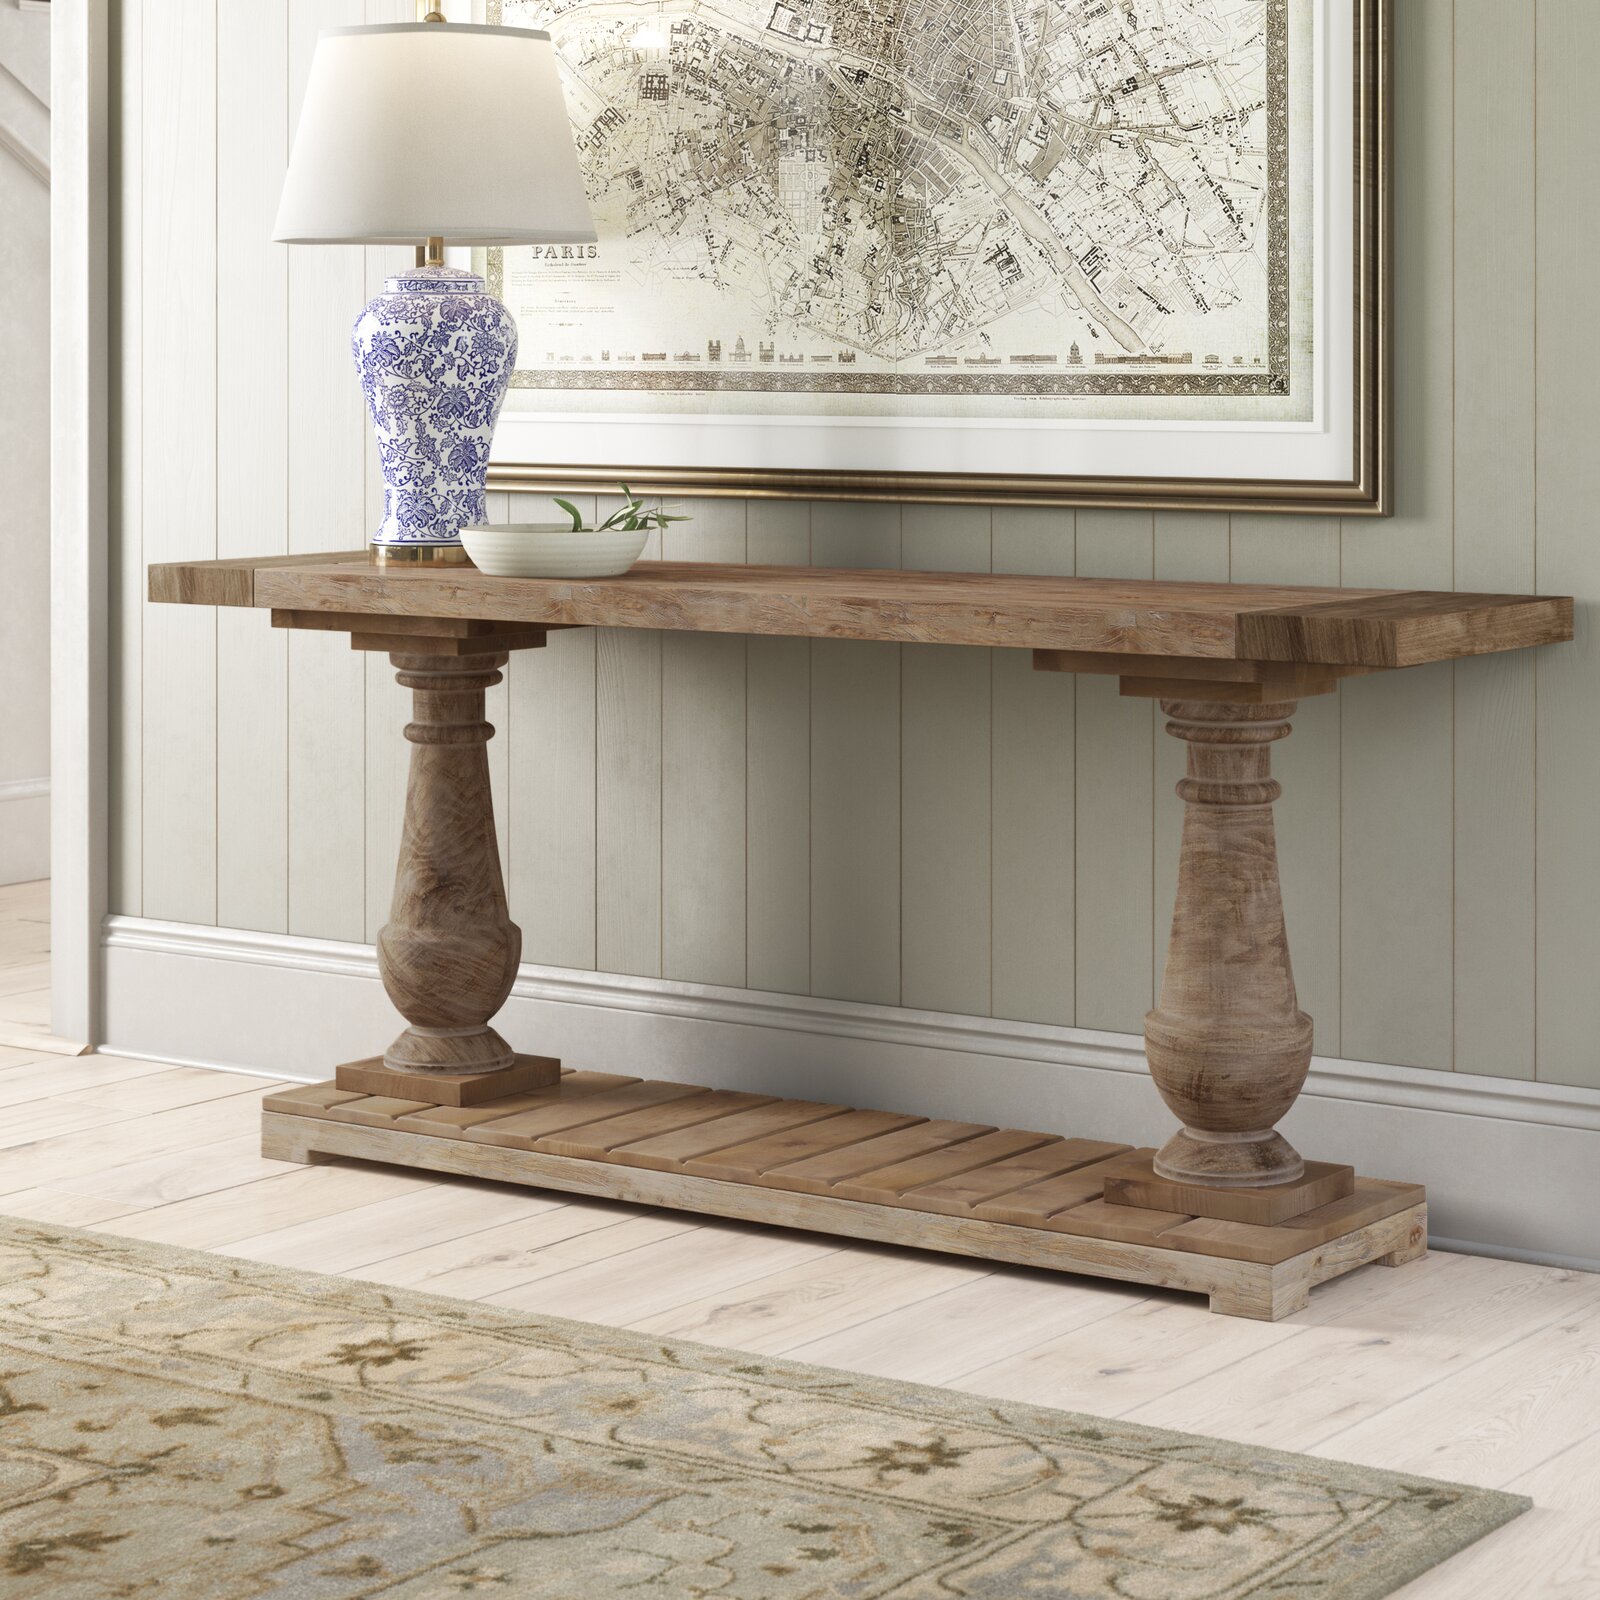 Requirements Accompany Setting 15 Gorgeous Entryway Table Ideas to Inspire Your Next Project - Décor Aid